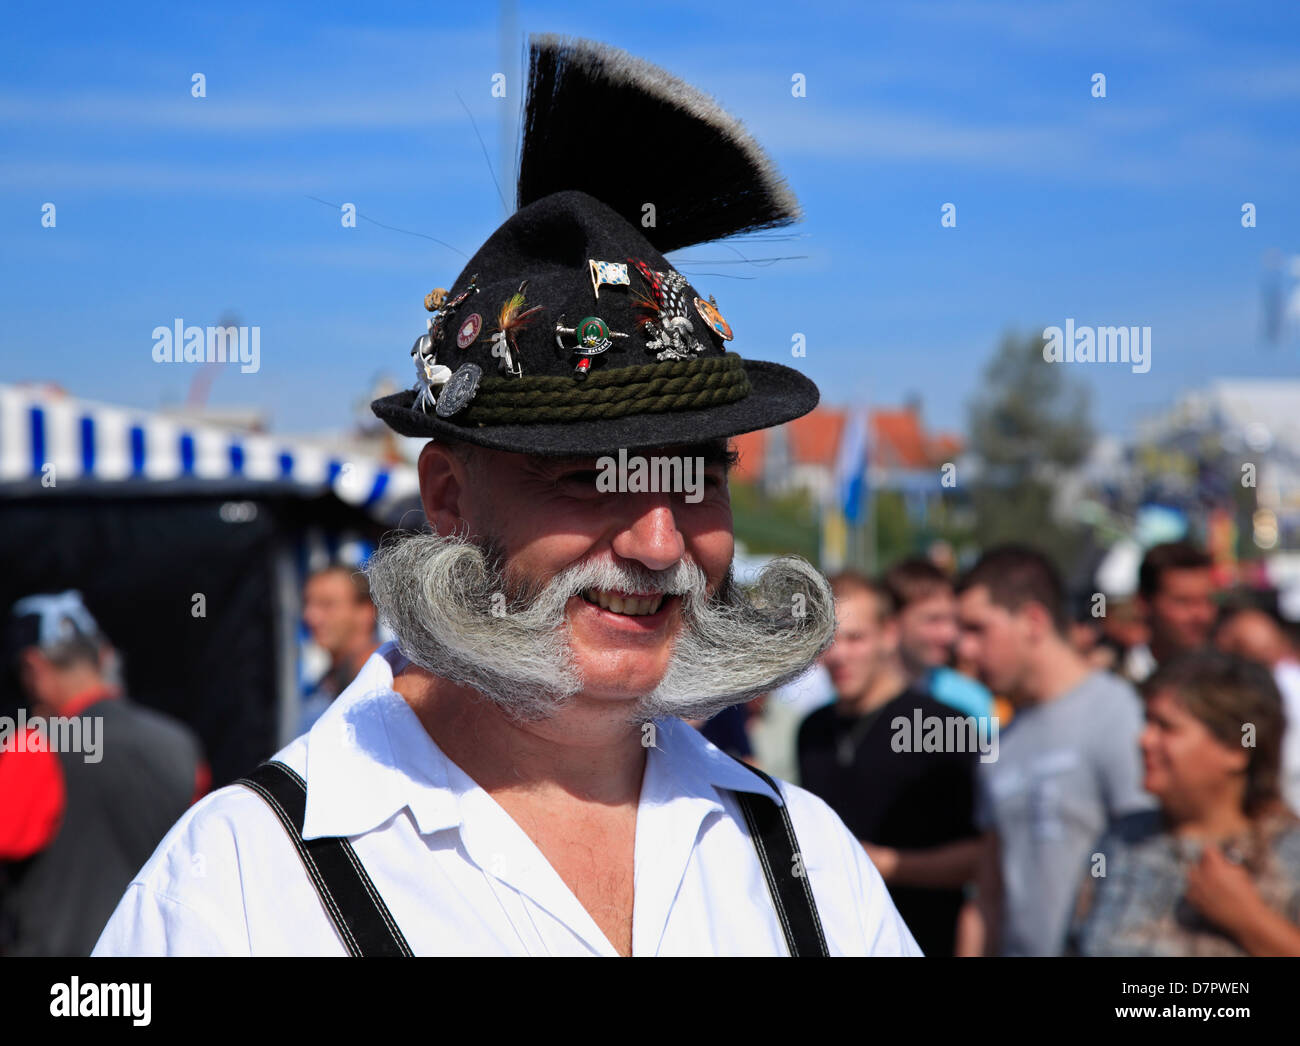 Oktoberfest, traditional old bavarian at Theresienwiese fairground, Munich, Bavaria, Germany Stock Photo